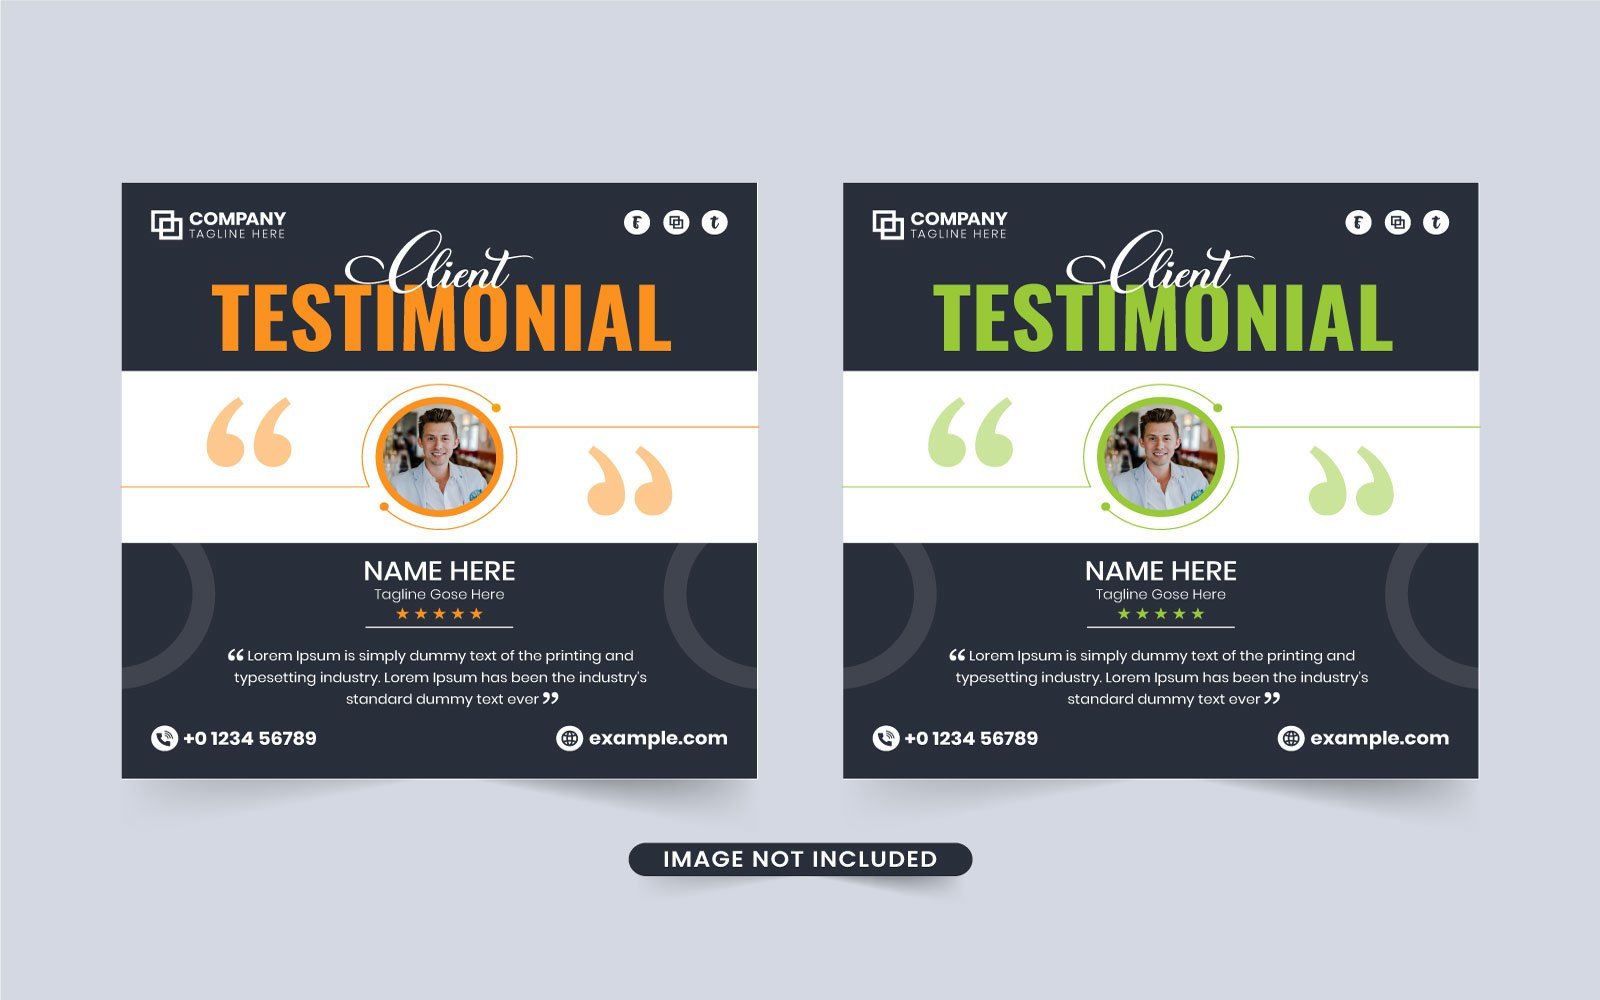 Template #273182 Review Customer Webdesign Template - Logo template Preview